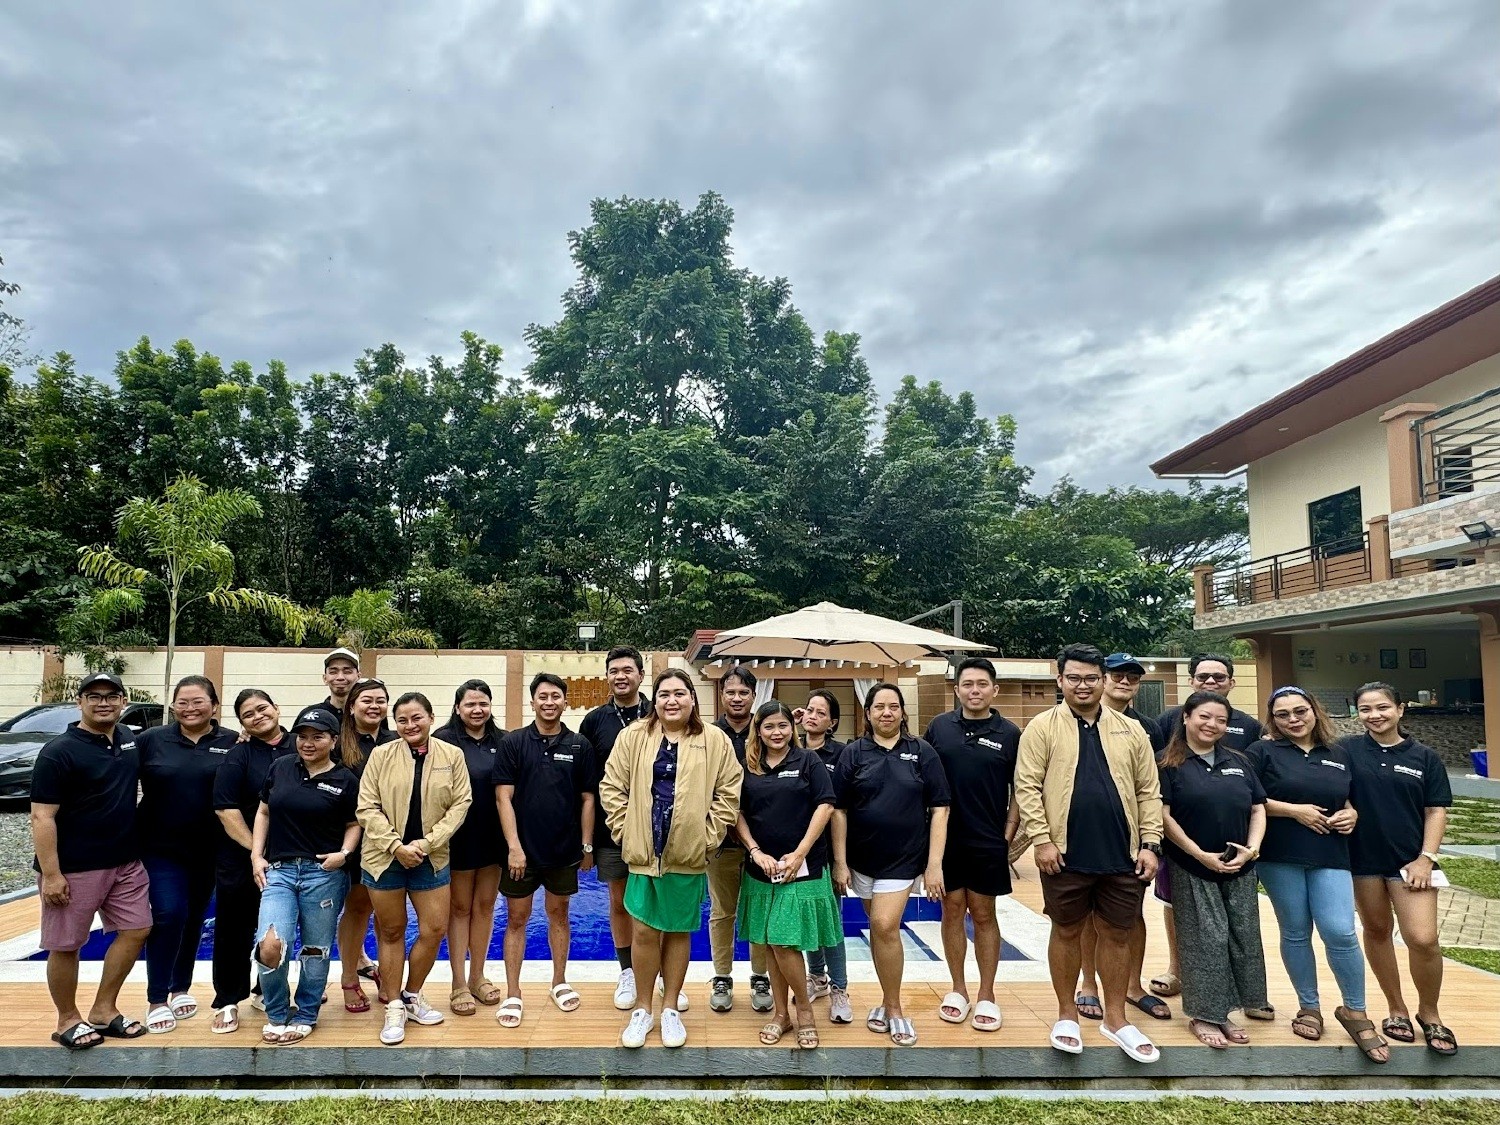 Dialing Up Fun in Manila! Dialers enjoying a team-building extravaganza in the Philippines. 